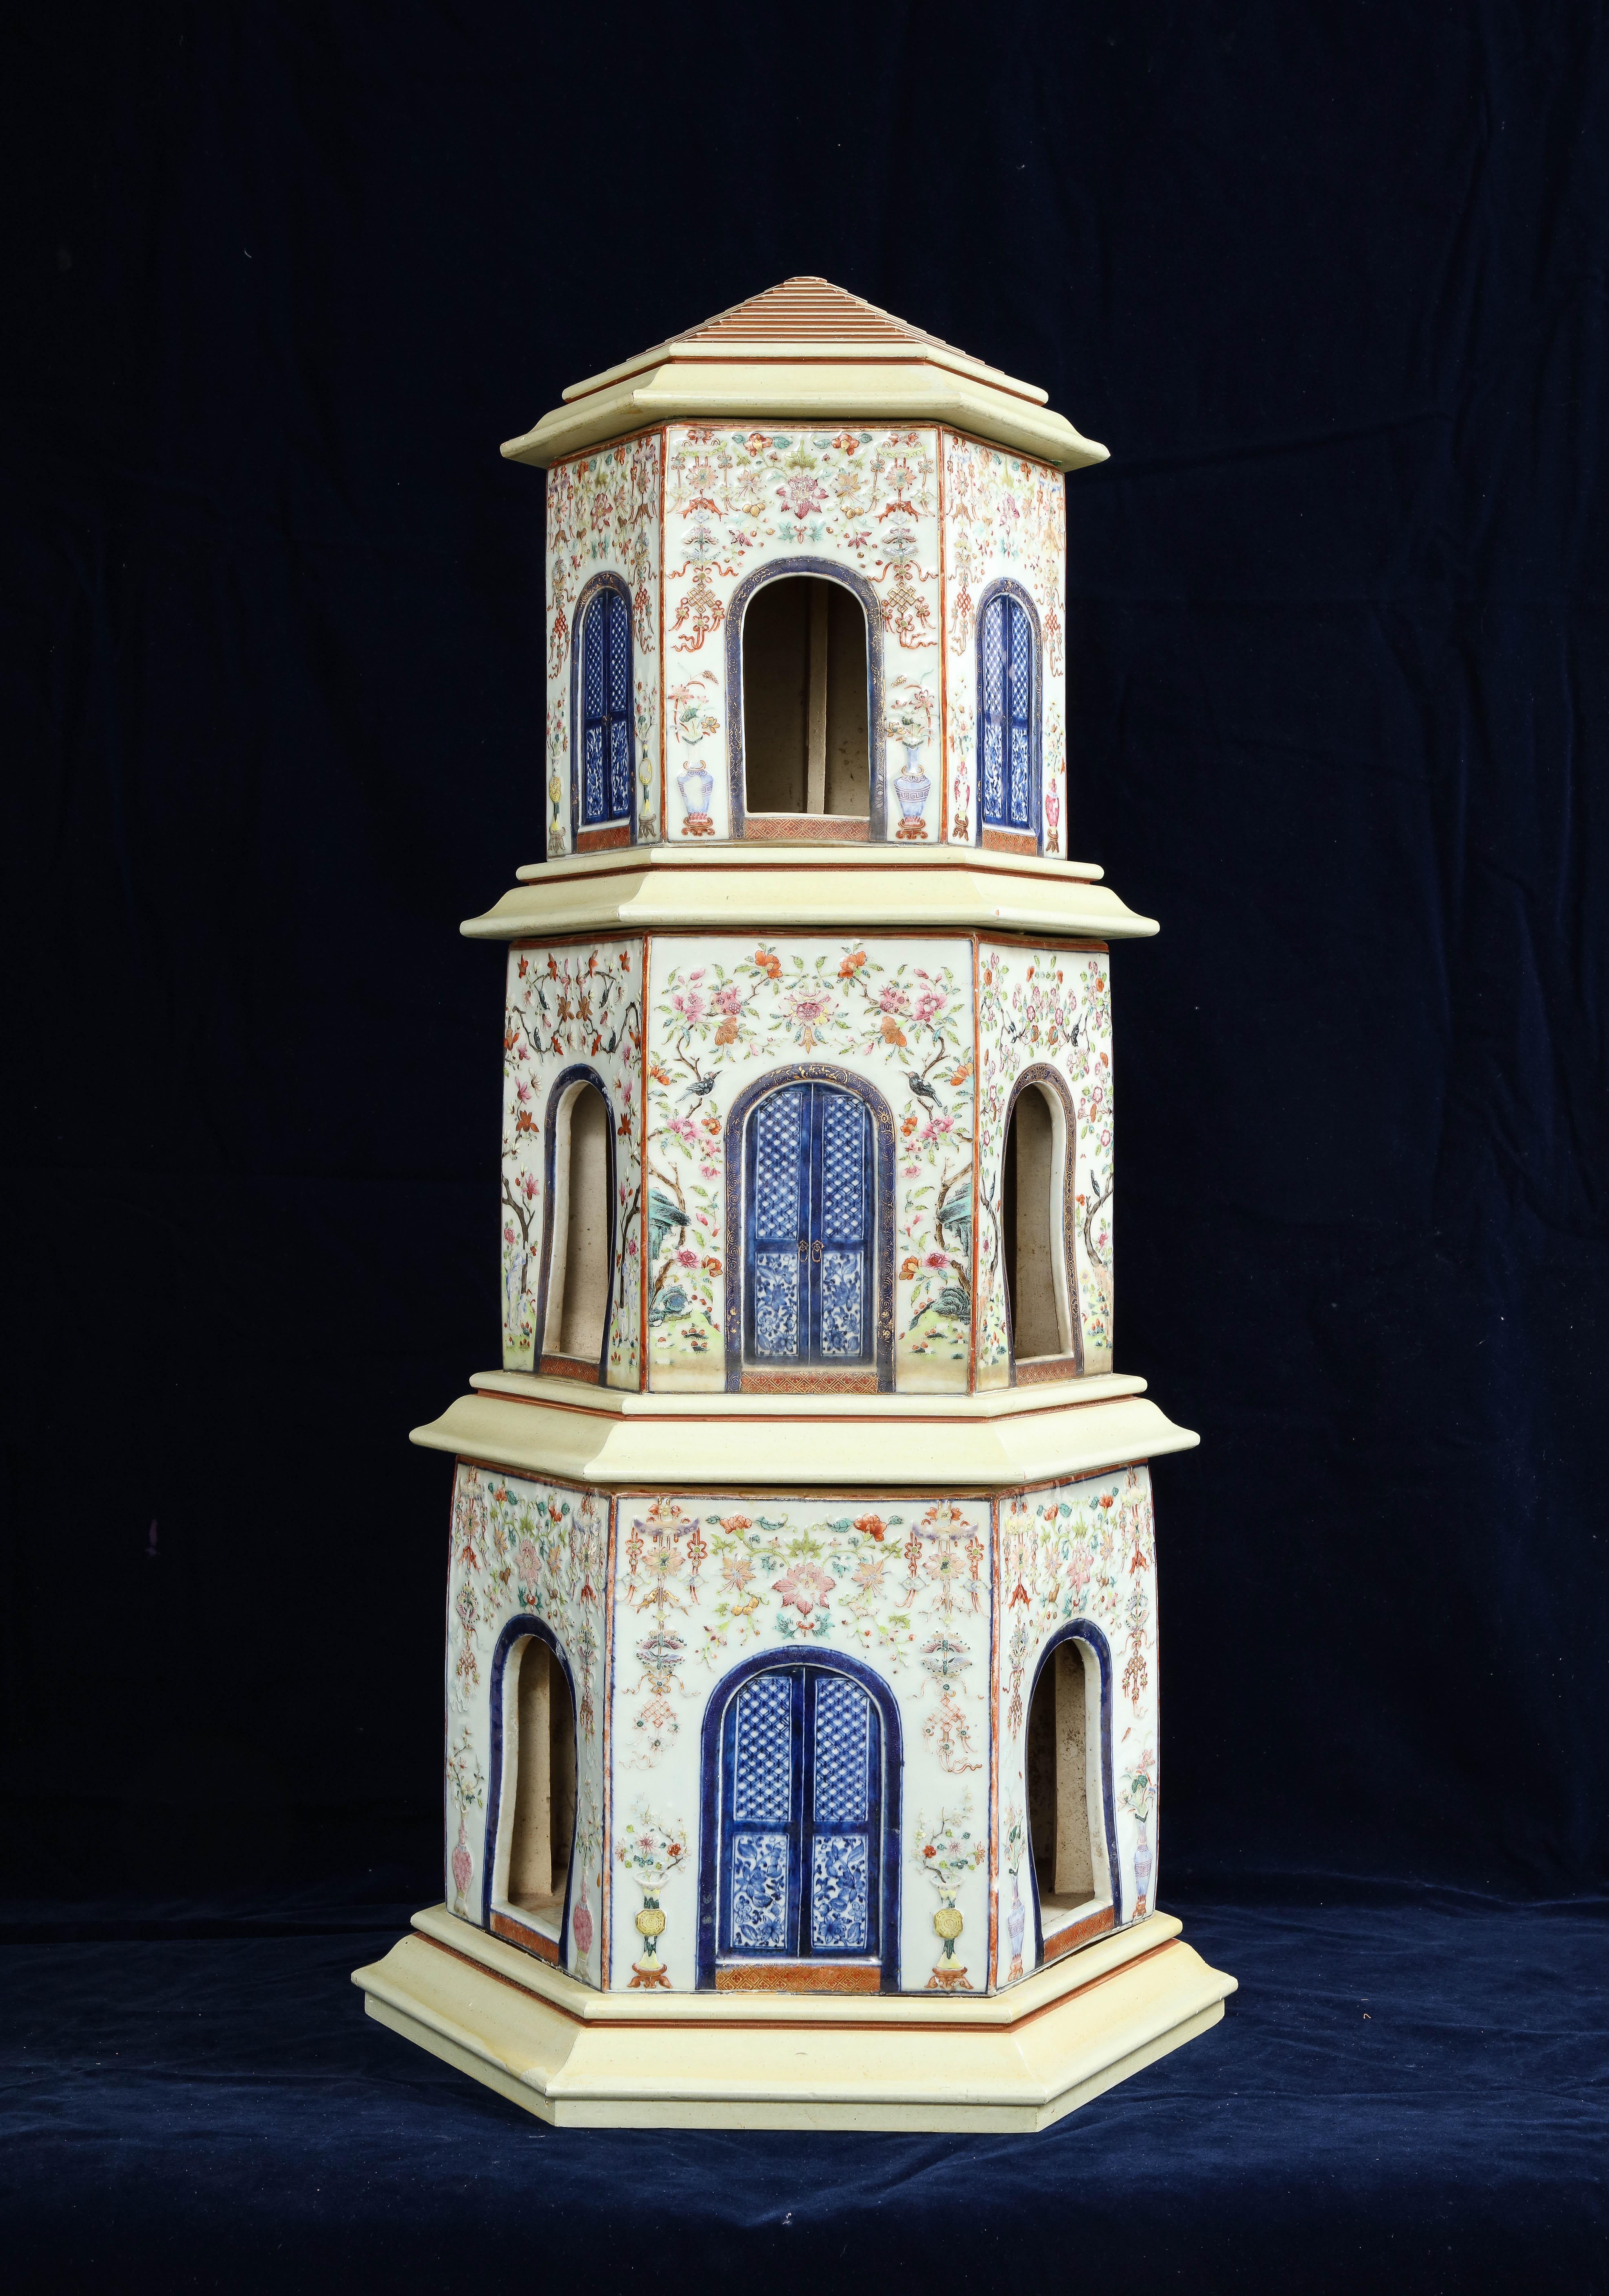 An 18th Century Large Chinese Qianlong Period Famille Rose Porcelain Pagoda Centerpiece.  Dating back to the 18th century, this porcelain masterpiece stands tall at an impressive height of 34 inches, showcasing a captivating fusion of colors and